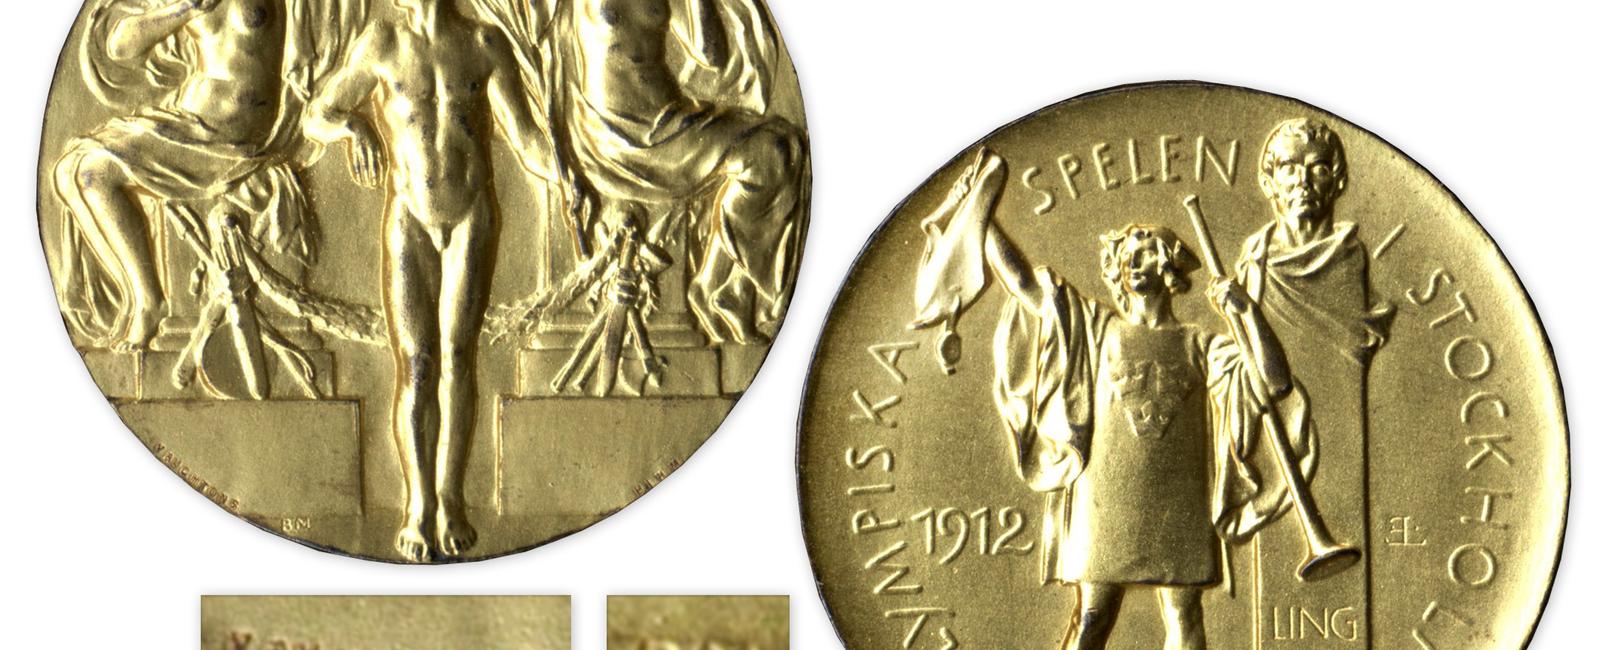 The 1912 olympics was the last time that gold medals were solid gold